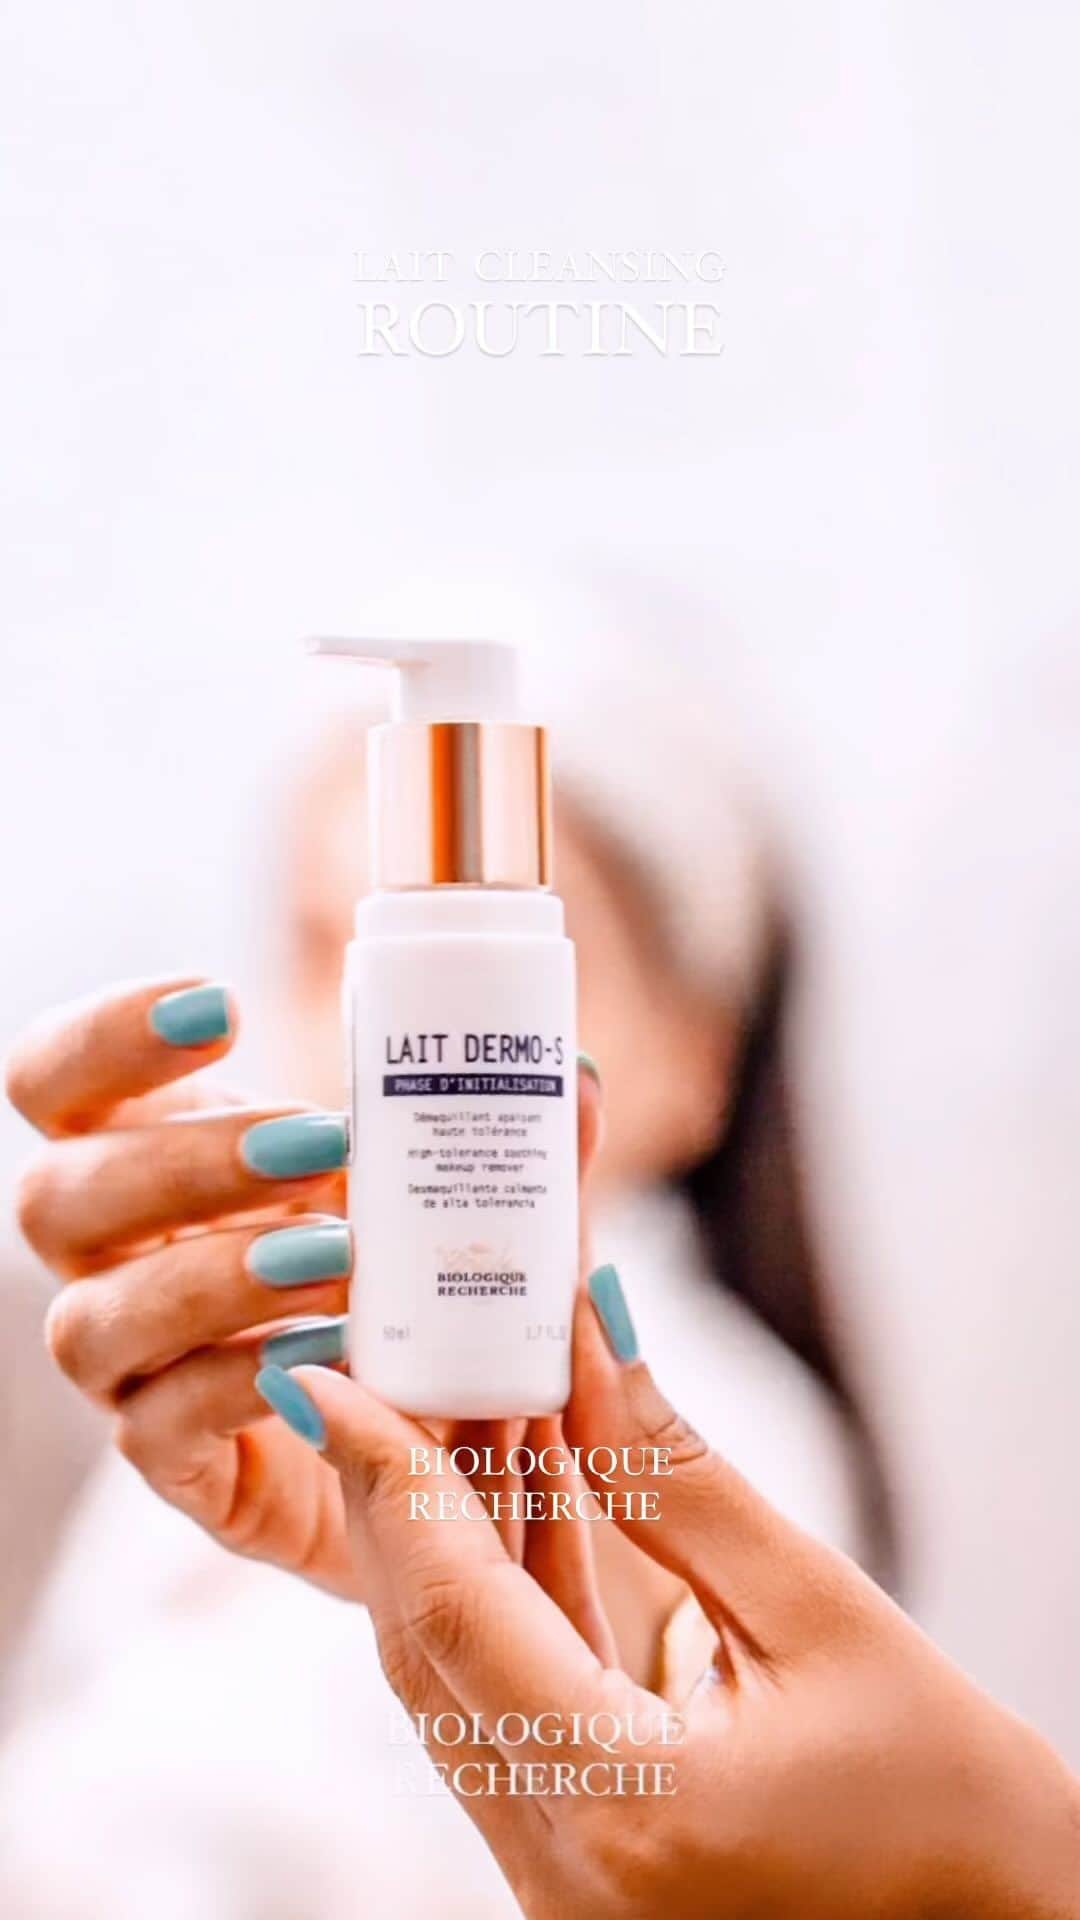 Biologique Recherche Iranのインスタグラム：「Rise & Shine with Radiant Skin! ✨🫠 🇬🇧 Nourishing my skin morning and night with @biologique_recherche LAIT Cleanser ✨🫶🏻  *Always remove your eye makeup first with “eye makeup remover” 👁️💦 *Apply LAIT on your dry skin and massage round upwards  *Use Wet Cloths / Wet pad to remove excess LAIT  *Always clean upwards / sideward 👋🏻 *Do not push the cloth too hard on your skin 🧏🏻‍♀️ *Do not make extra wrinkle while cleansing  *Use 2 LAIT combo according to your skin type and Micellar water  *Do not use Soap/Shampoo on your face( it affects the PH) *Do not use aromatic wet pad for removing makeup   P.S. It’s also highly recommended to include the ‘Lait’ cleansing ritual every morning. This is because overnight, our skin undergoes a process of regeneration, which can leave behind dead skin cells. By cleansing your skin, you help reveal its natural radiance and brightness.  🇮🇷 توضیح فارسی در کامنت پین شده   #biologiquerecherche #biologique_recherche #biologiquerechercheusa #biologiquerechercheportugal🇵🇹  #روتین_پوست #روتین_پوستی #آرایش_پاک_کن #بیولوژیک_روشرش」